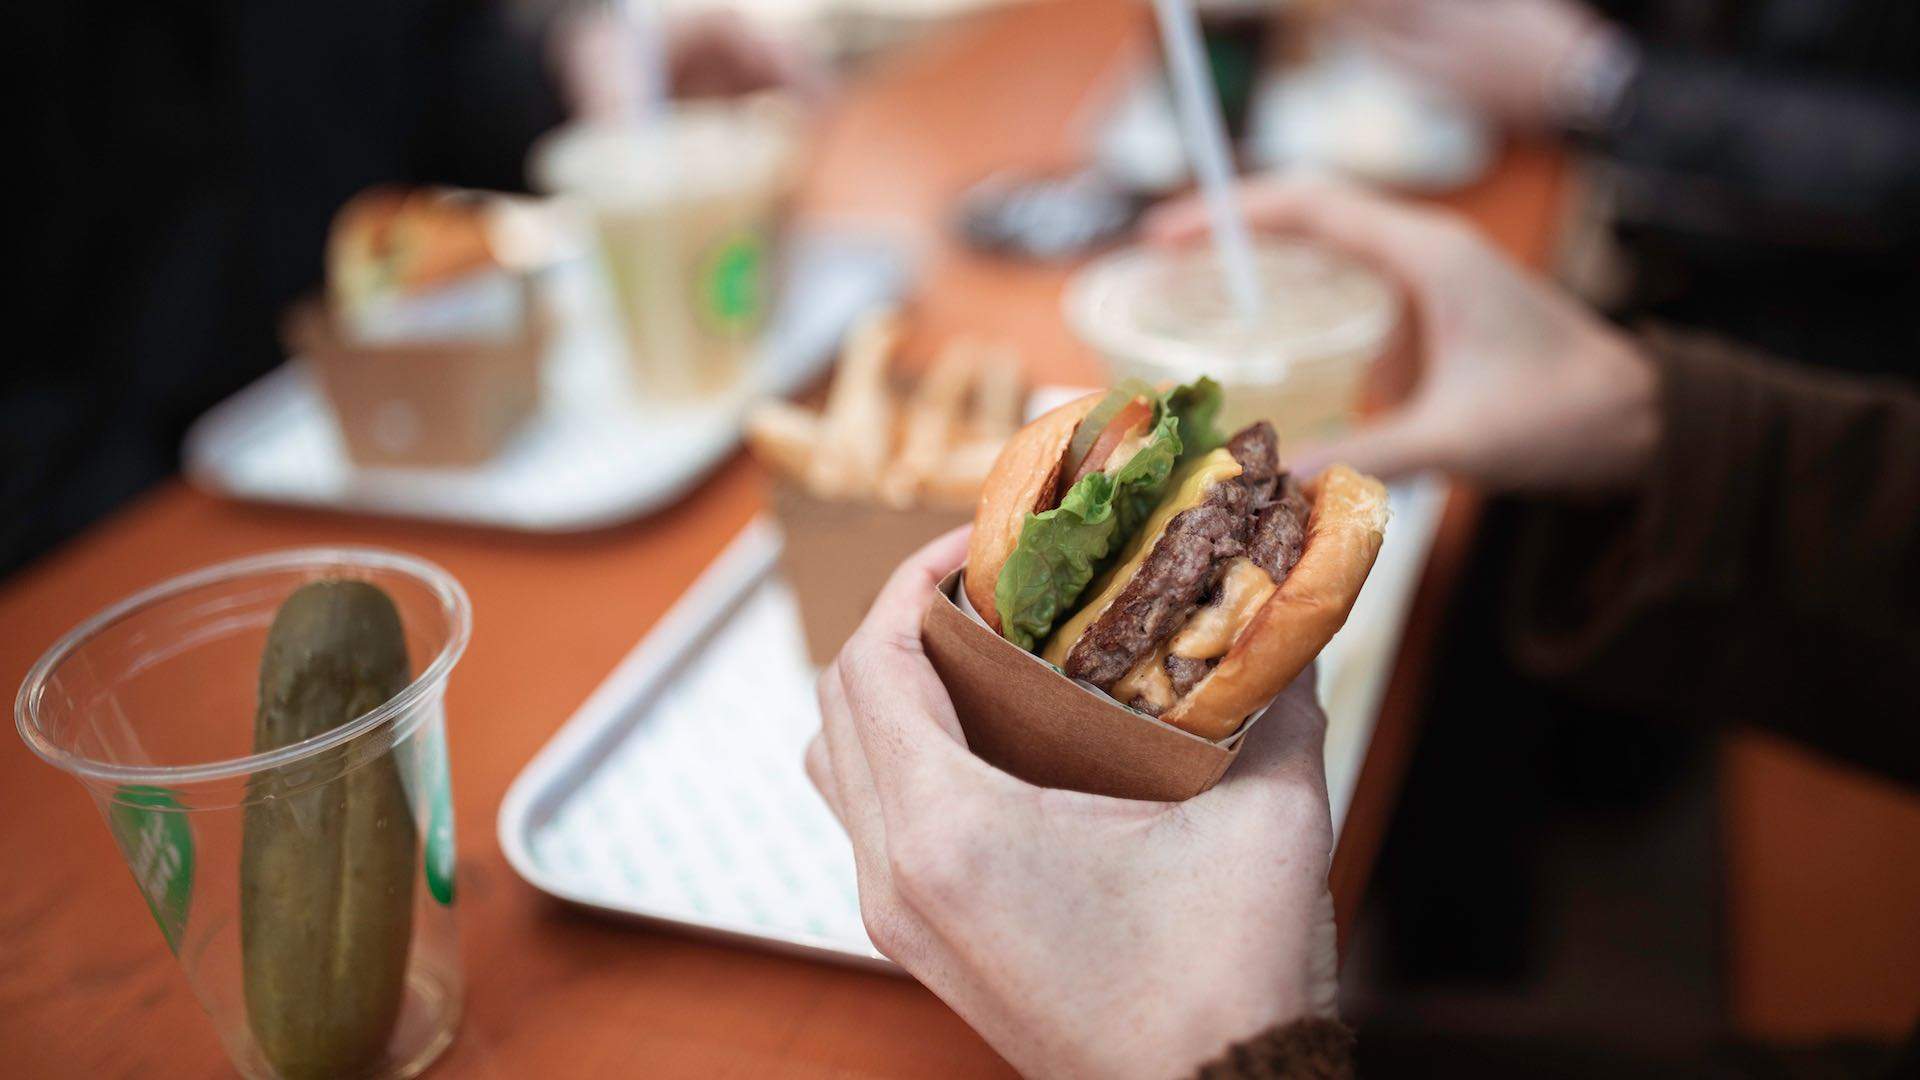 We're Giving Away a Menu Tour of New Burger Joint Shake Out